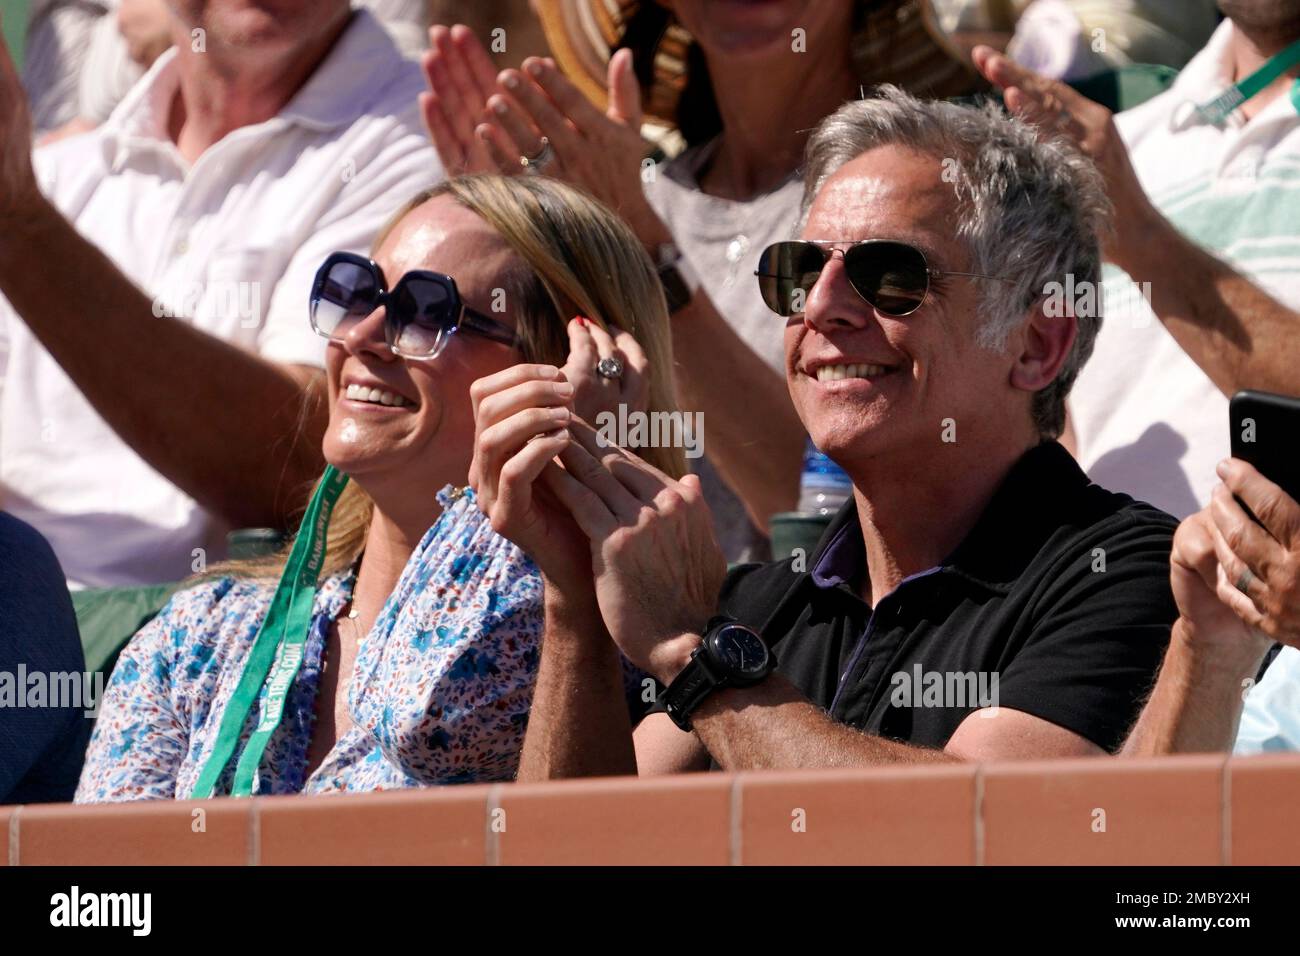 Actor Ben Stiller and his wife Christine Taylor watch Rafael Nadal, of Spain, play Reilly Opelka at the BNP Paribas Open tennis tournament Wednesday, March 16, 2022, in Indian Wells, Calif